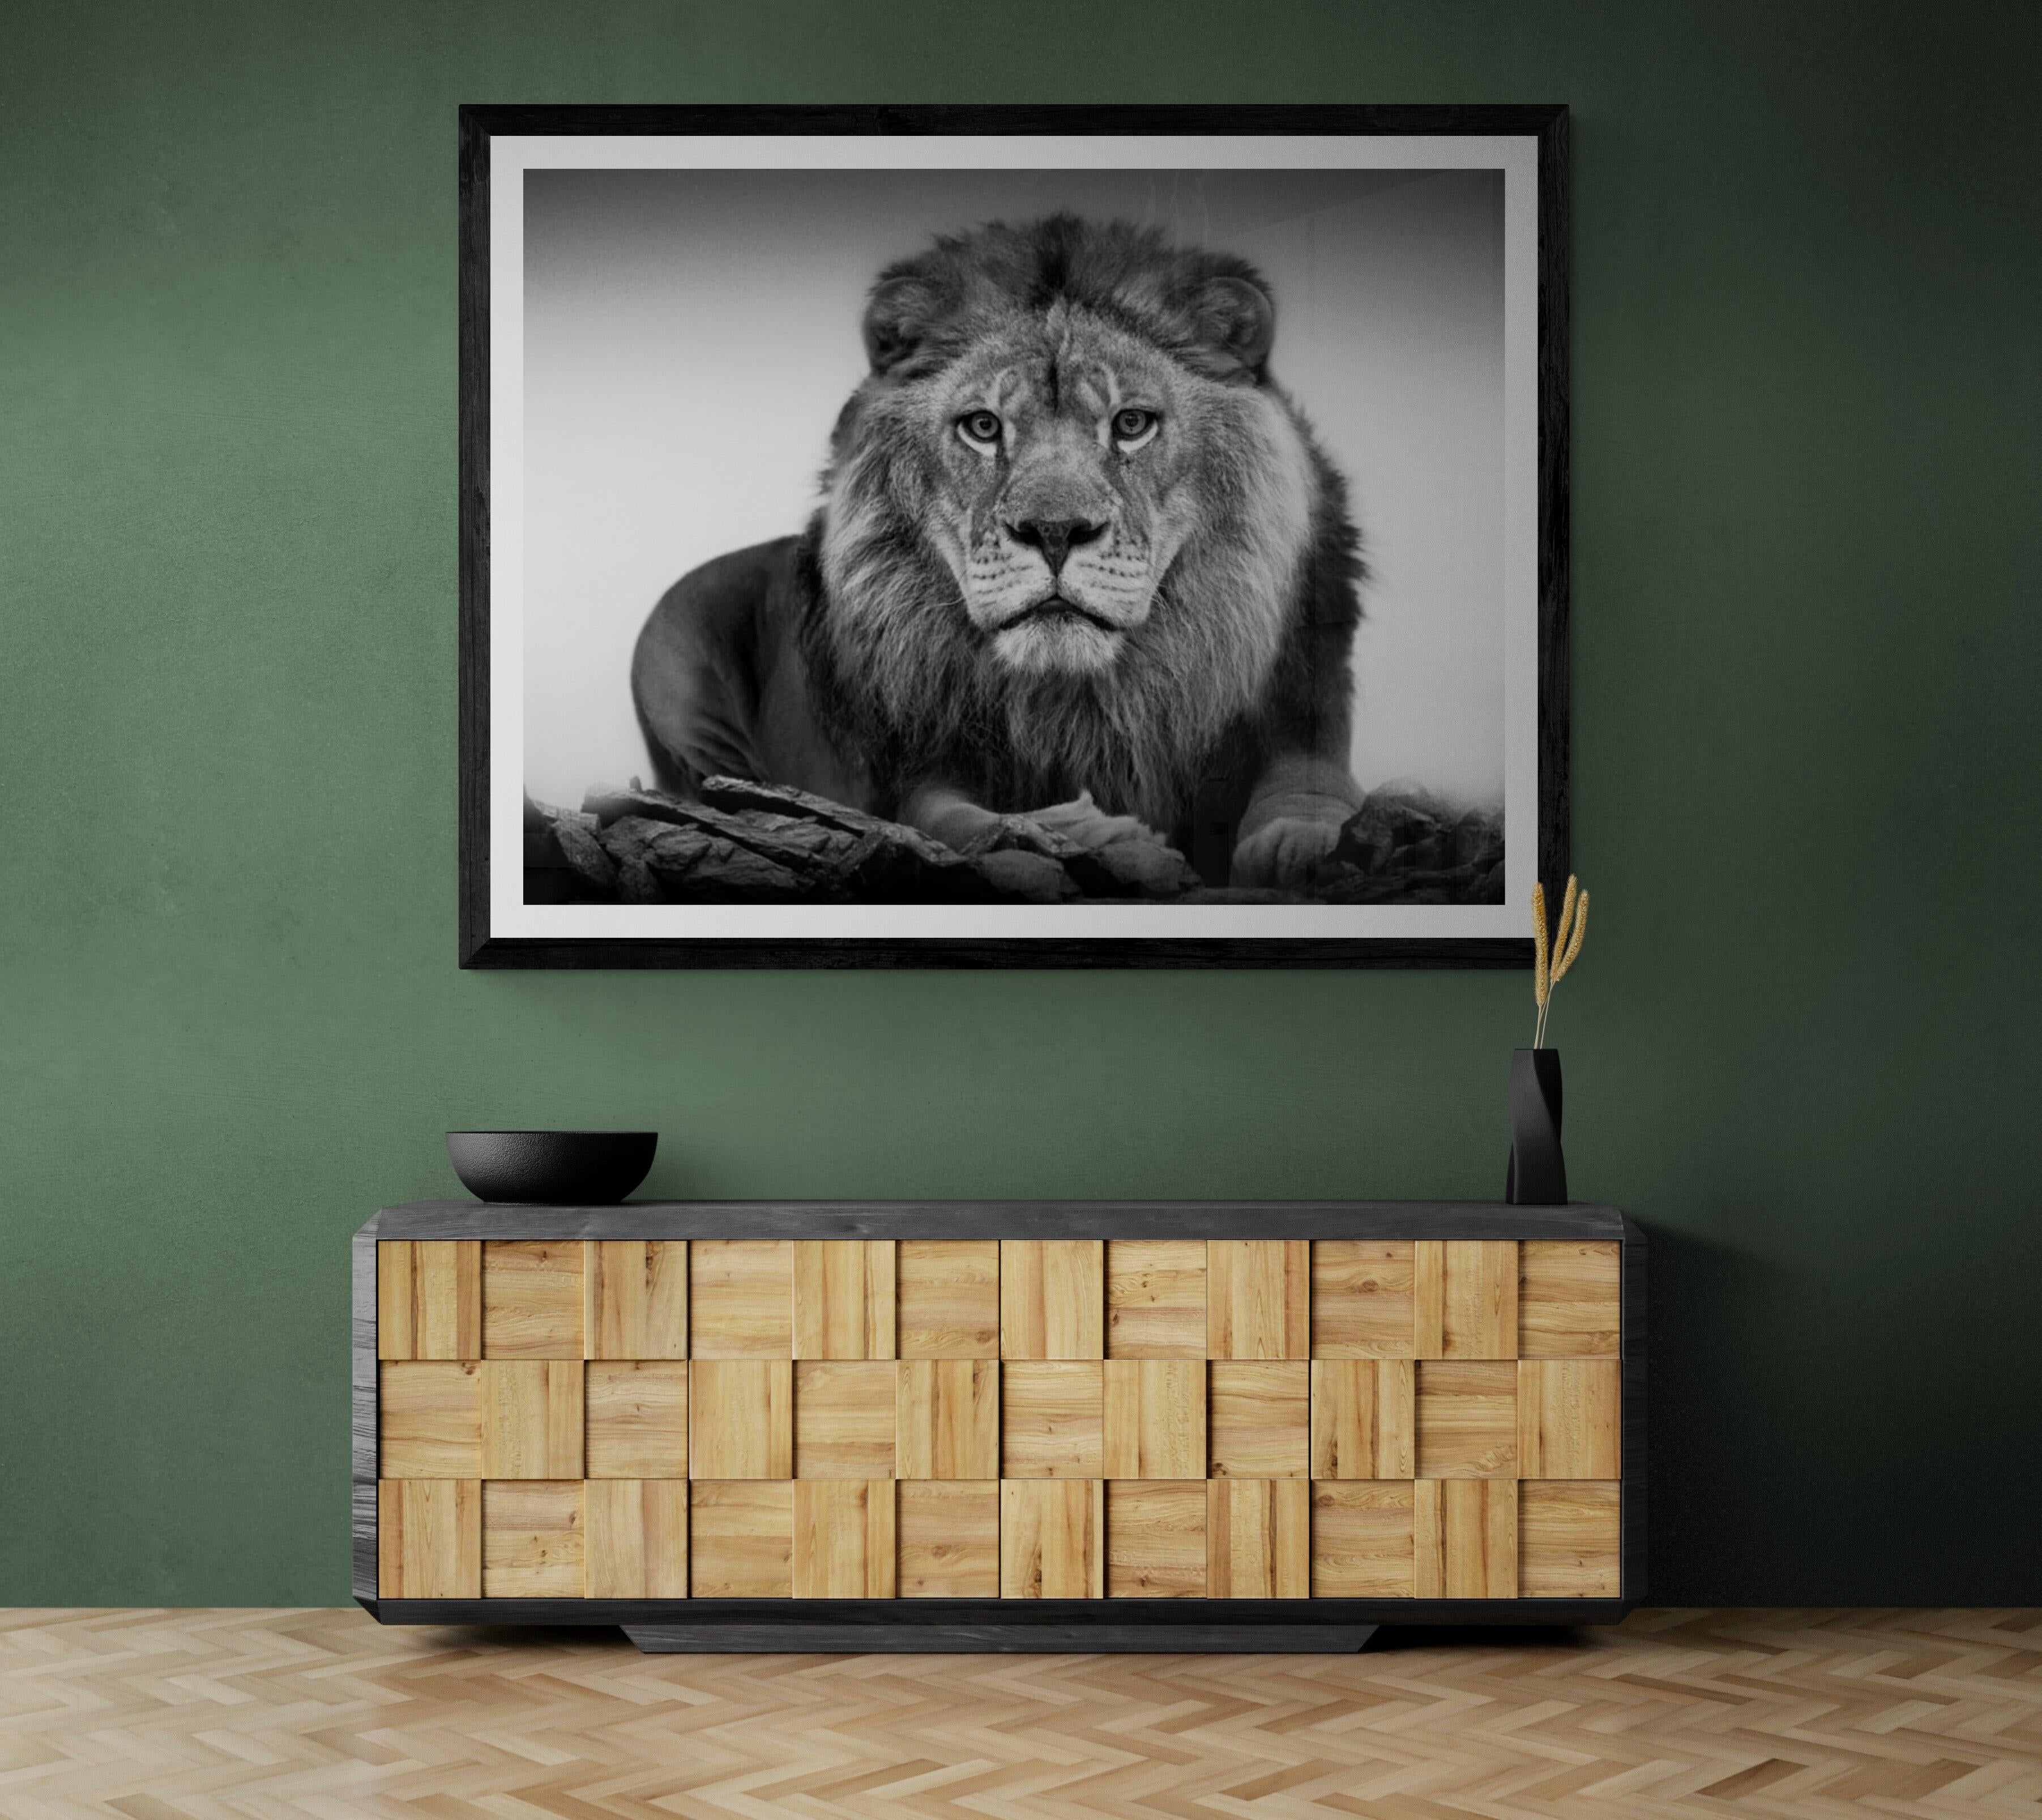 This is a contemporary photograph of an African Lion. 
36x48
Singed and numbered
Edition of 12
Archival Semi Gloss Paper.
Framing available. Inquire for rates. 

FREE SHIPPING

Shane Russeck has built a reputation for capturing America's landscapes,